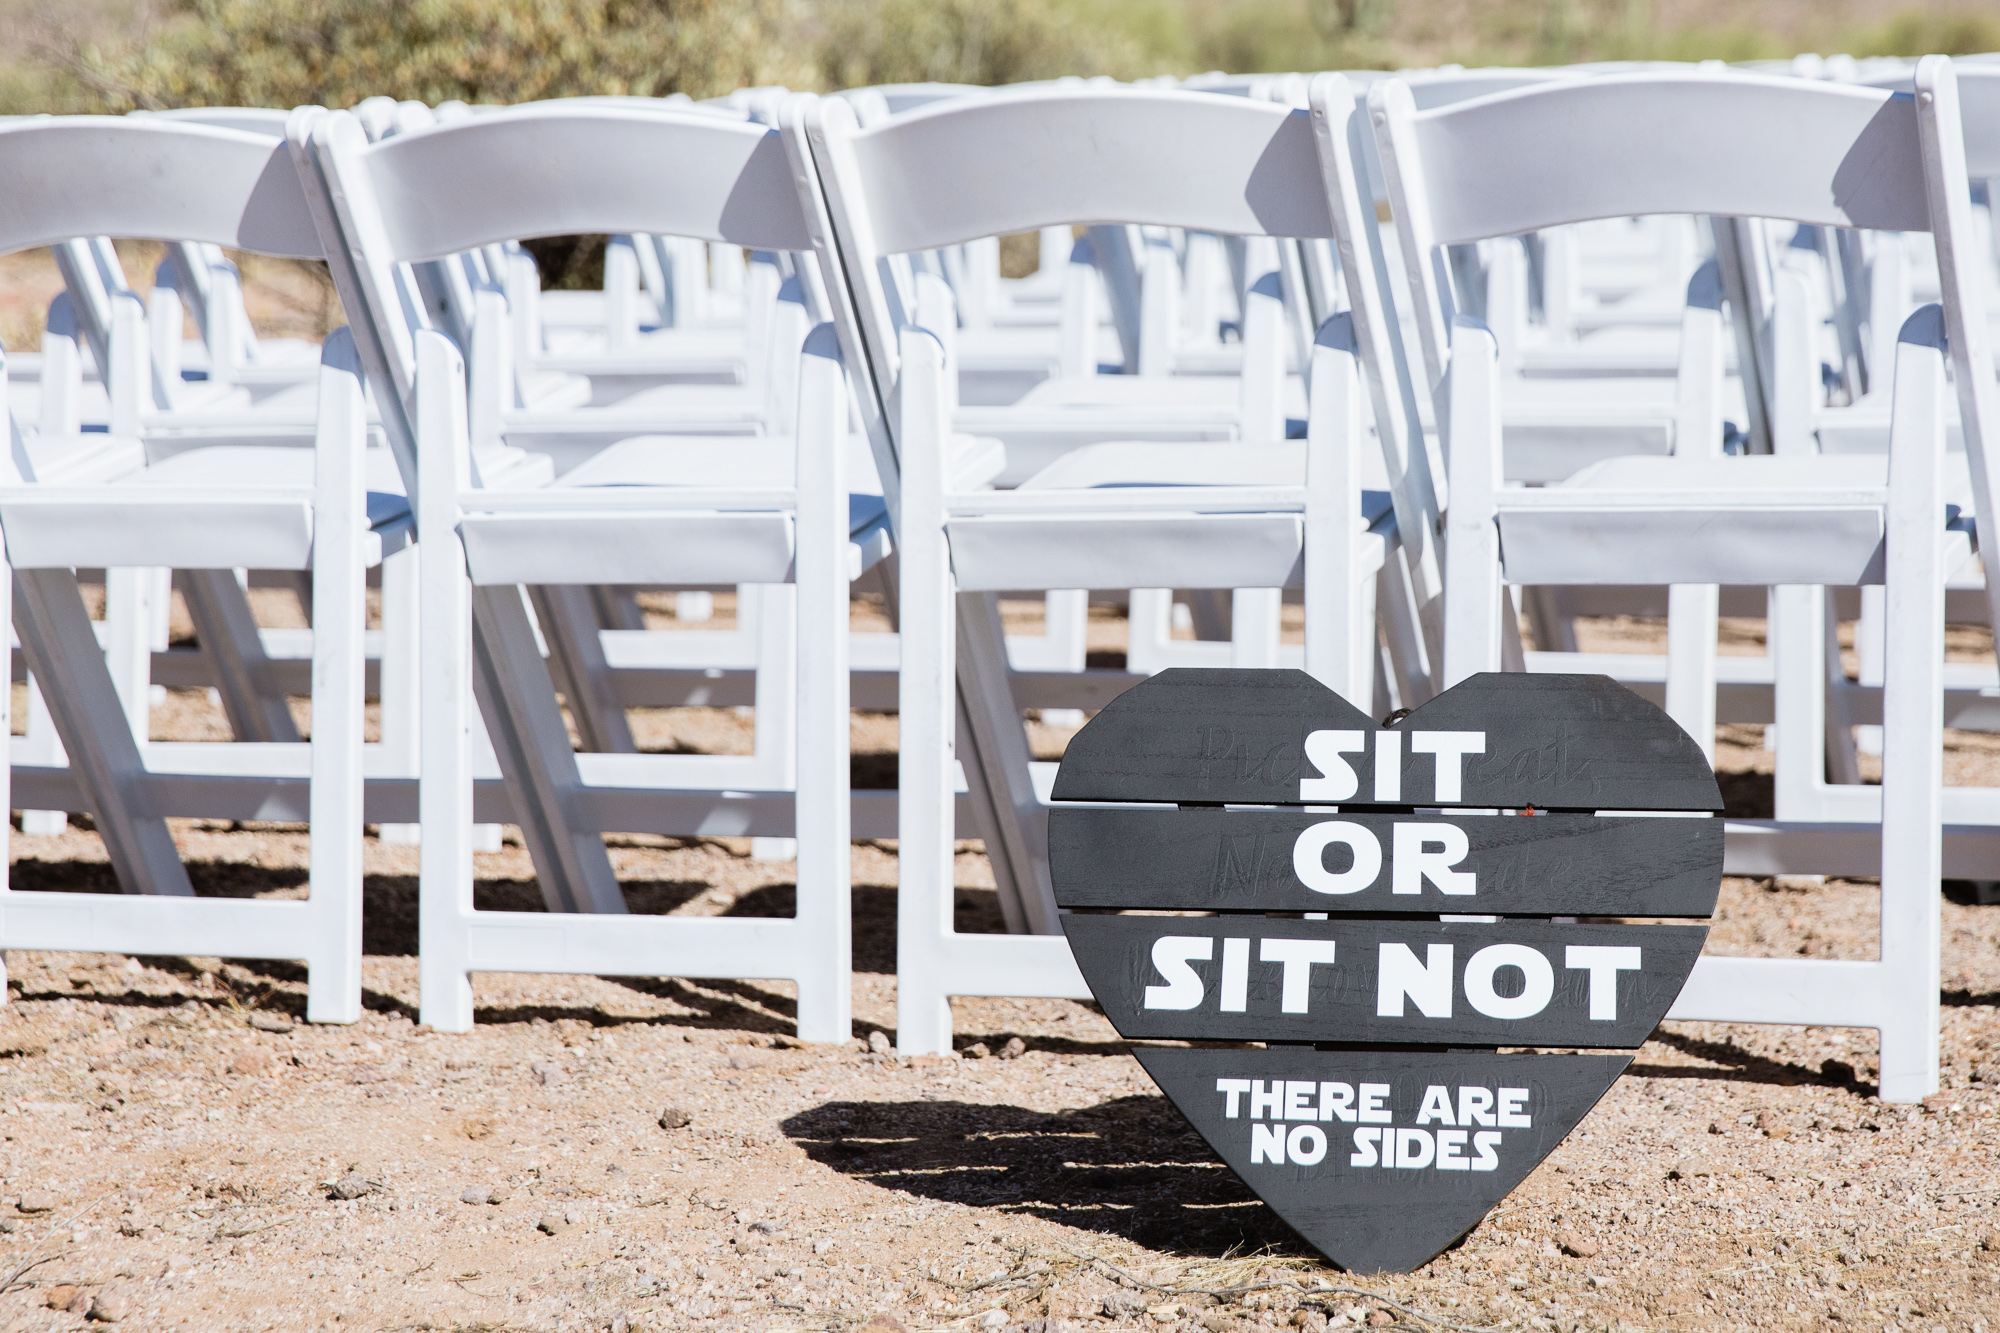 Star Wars themed wedding ceremony at the superstition mountains at Lost Dutchman State Park by Arizona wedding photographer PMA Photography.